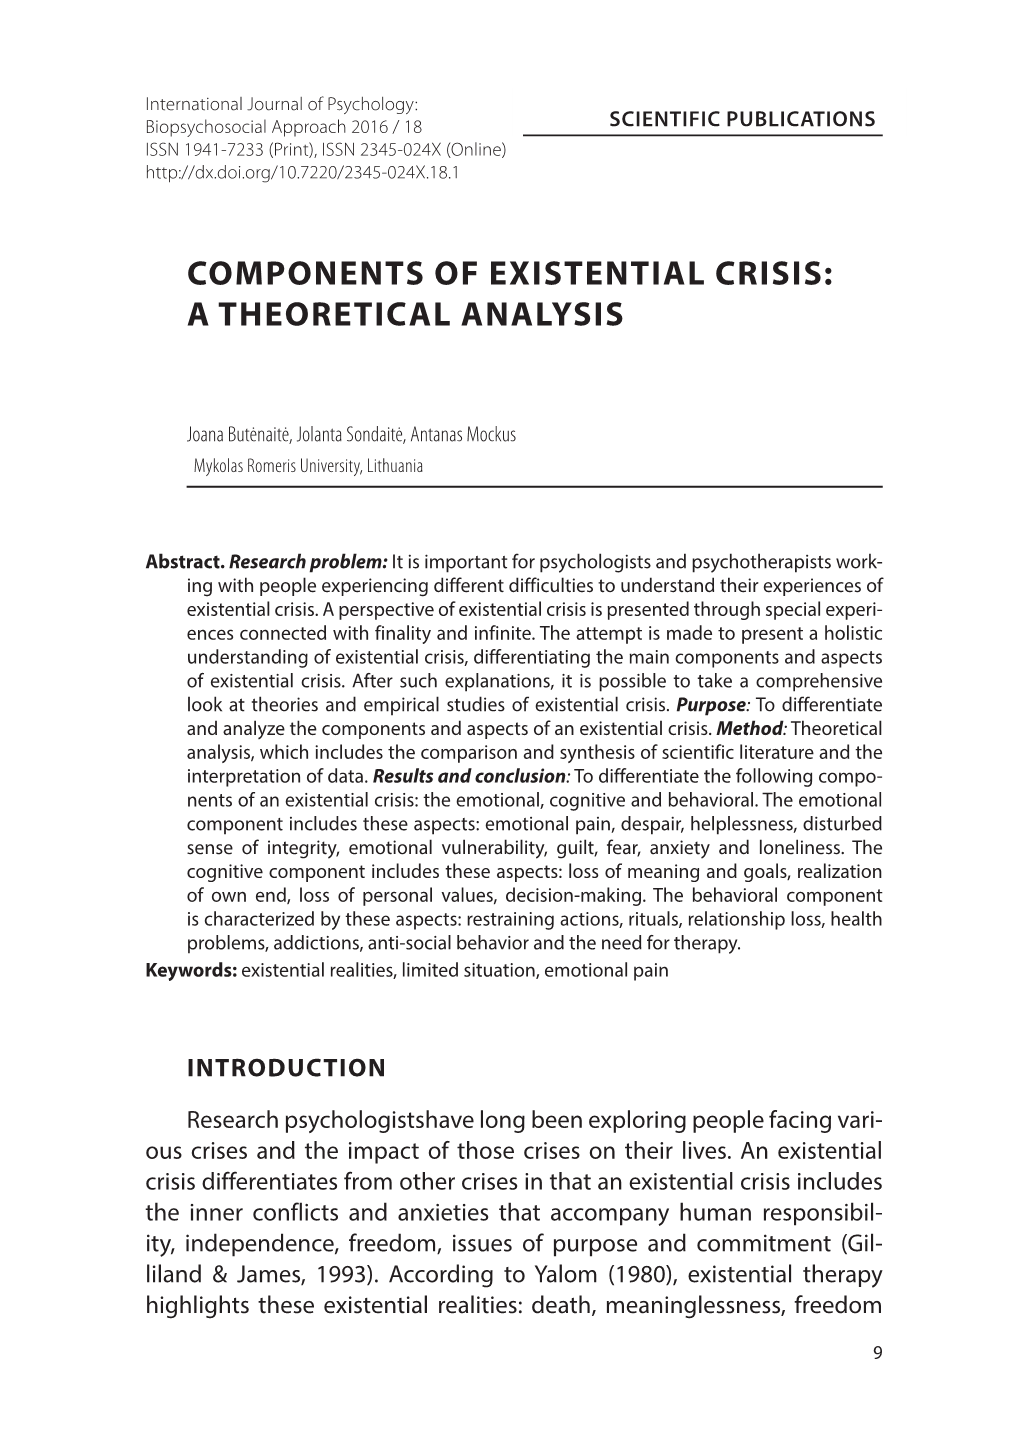 Components of Existential Crisis: a Theoretical Analysis